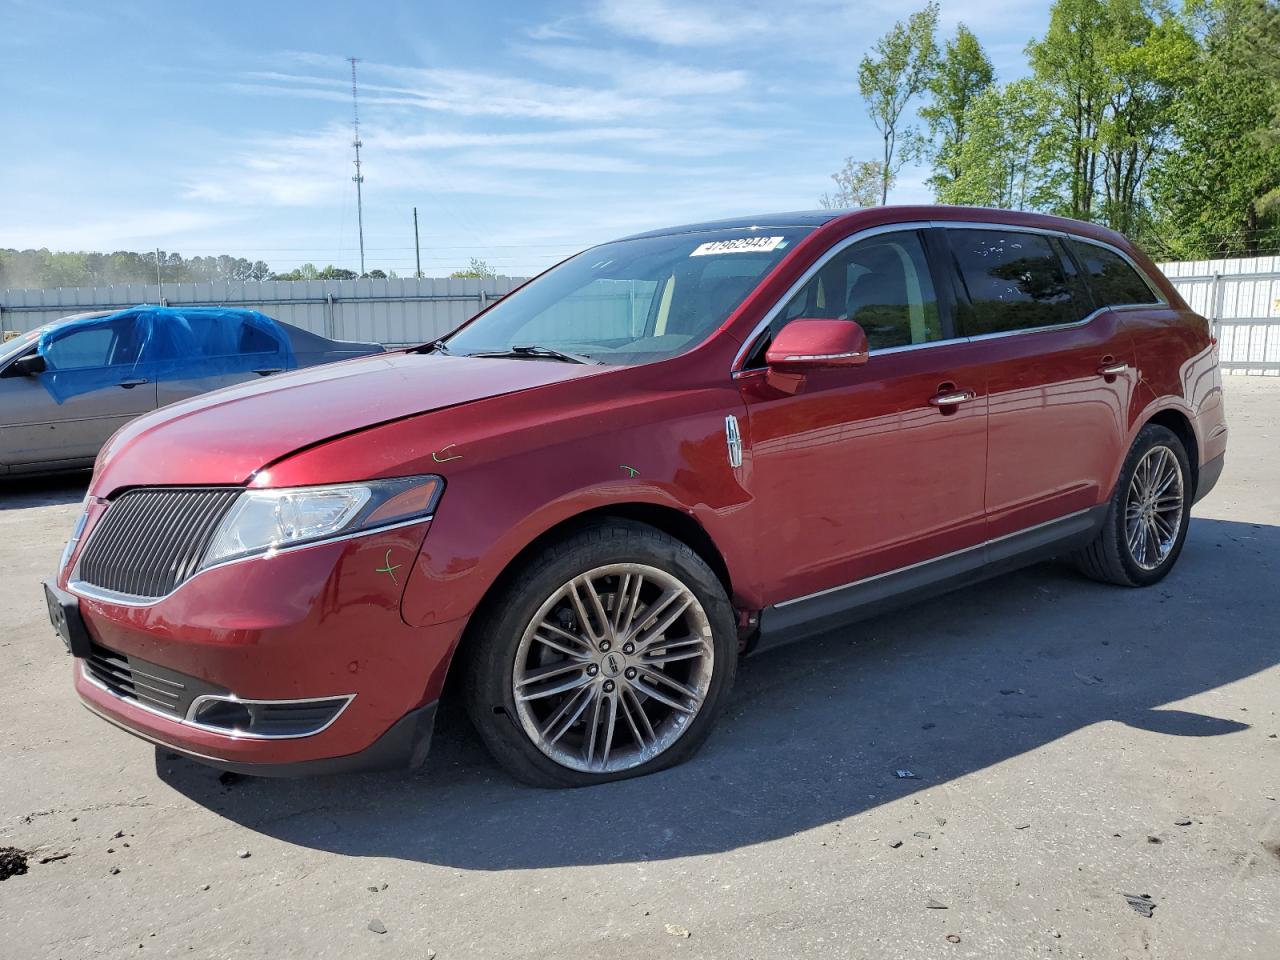 2014 Lincoln MKT for sale at Copart Dunn, NC Lot #47962*** |  SalvageReseller.com